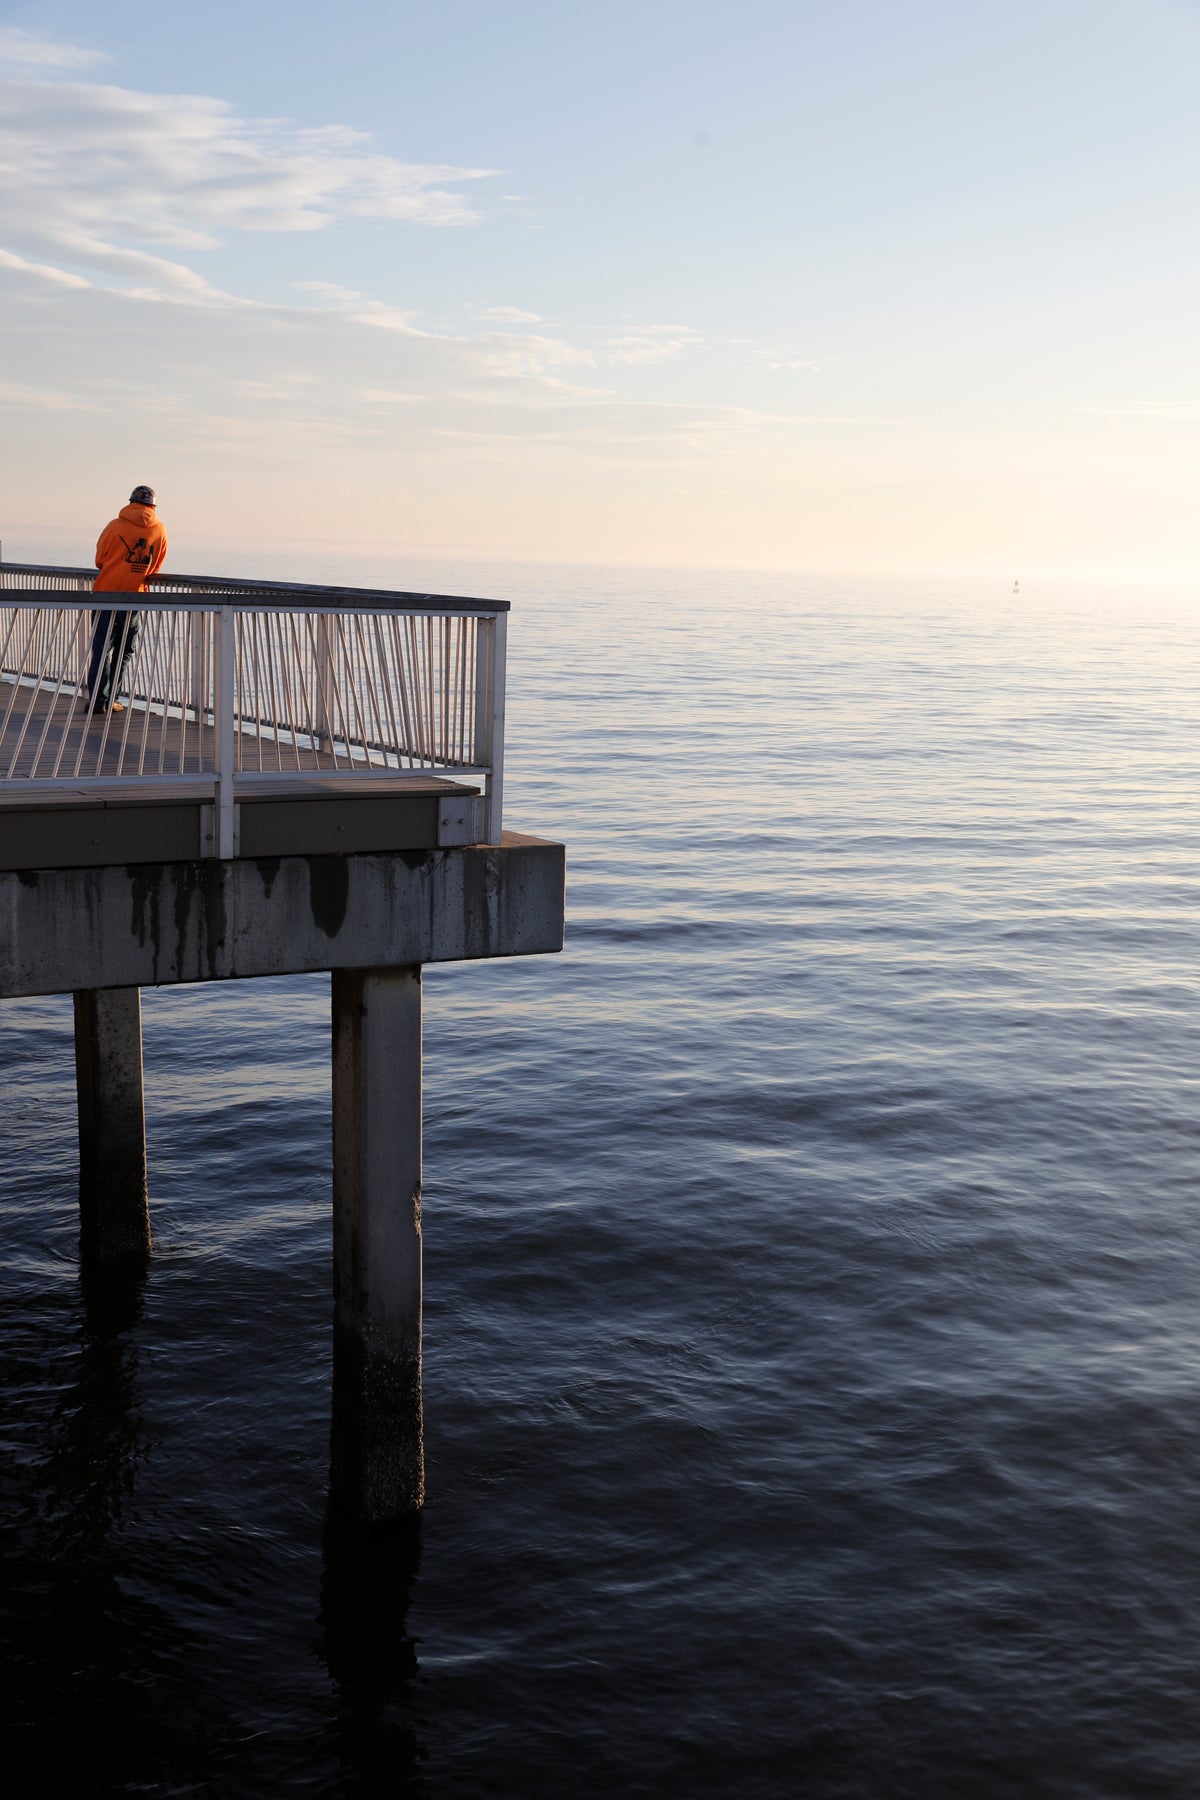 lone man stands on a pier at sunset